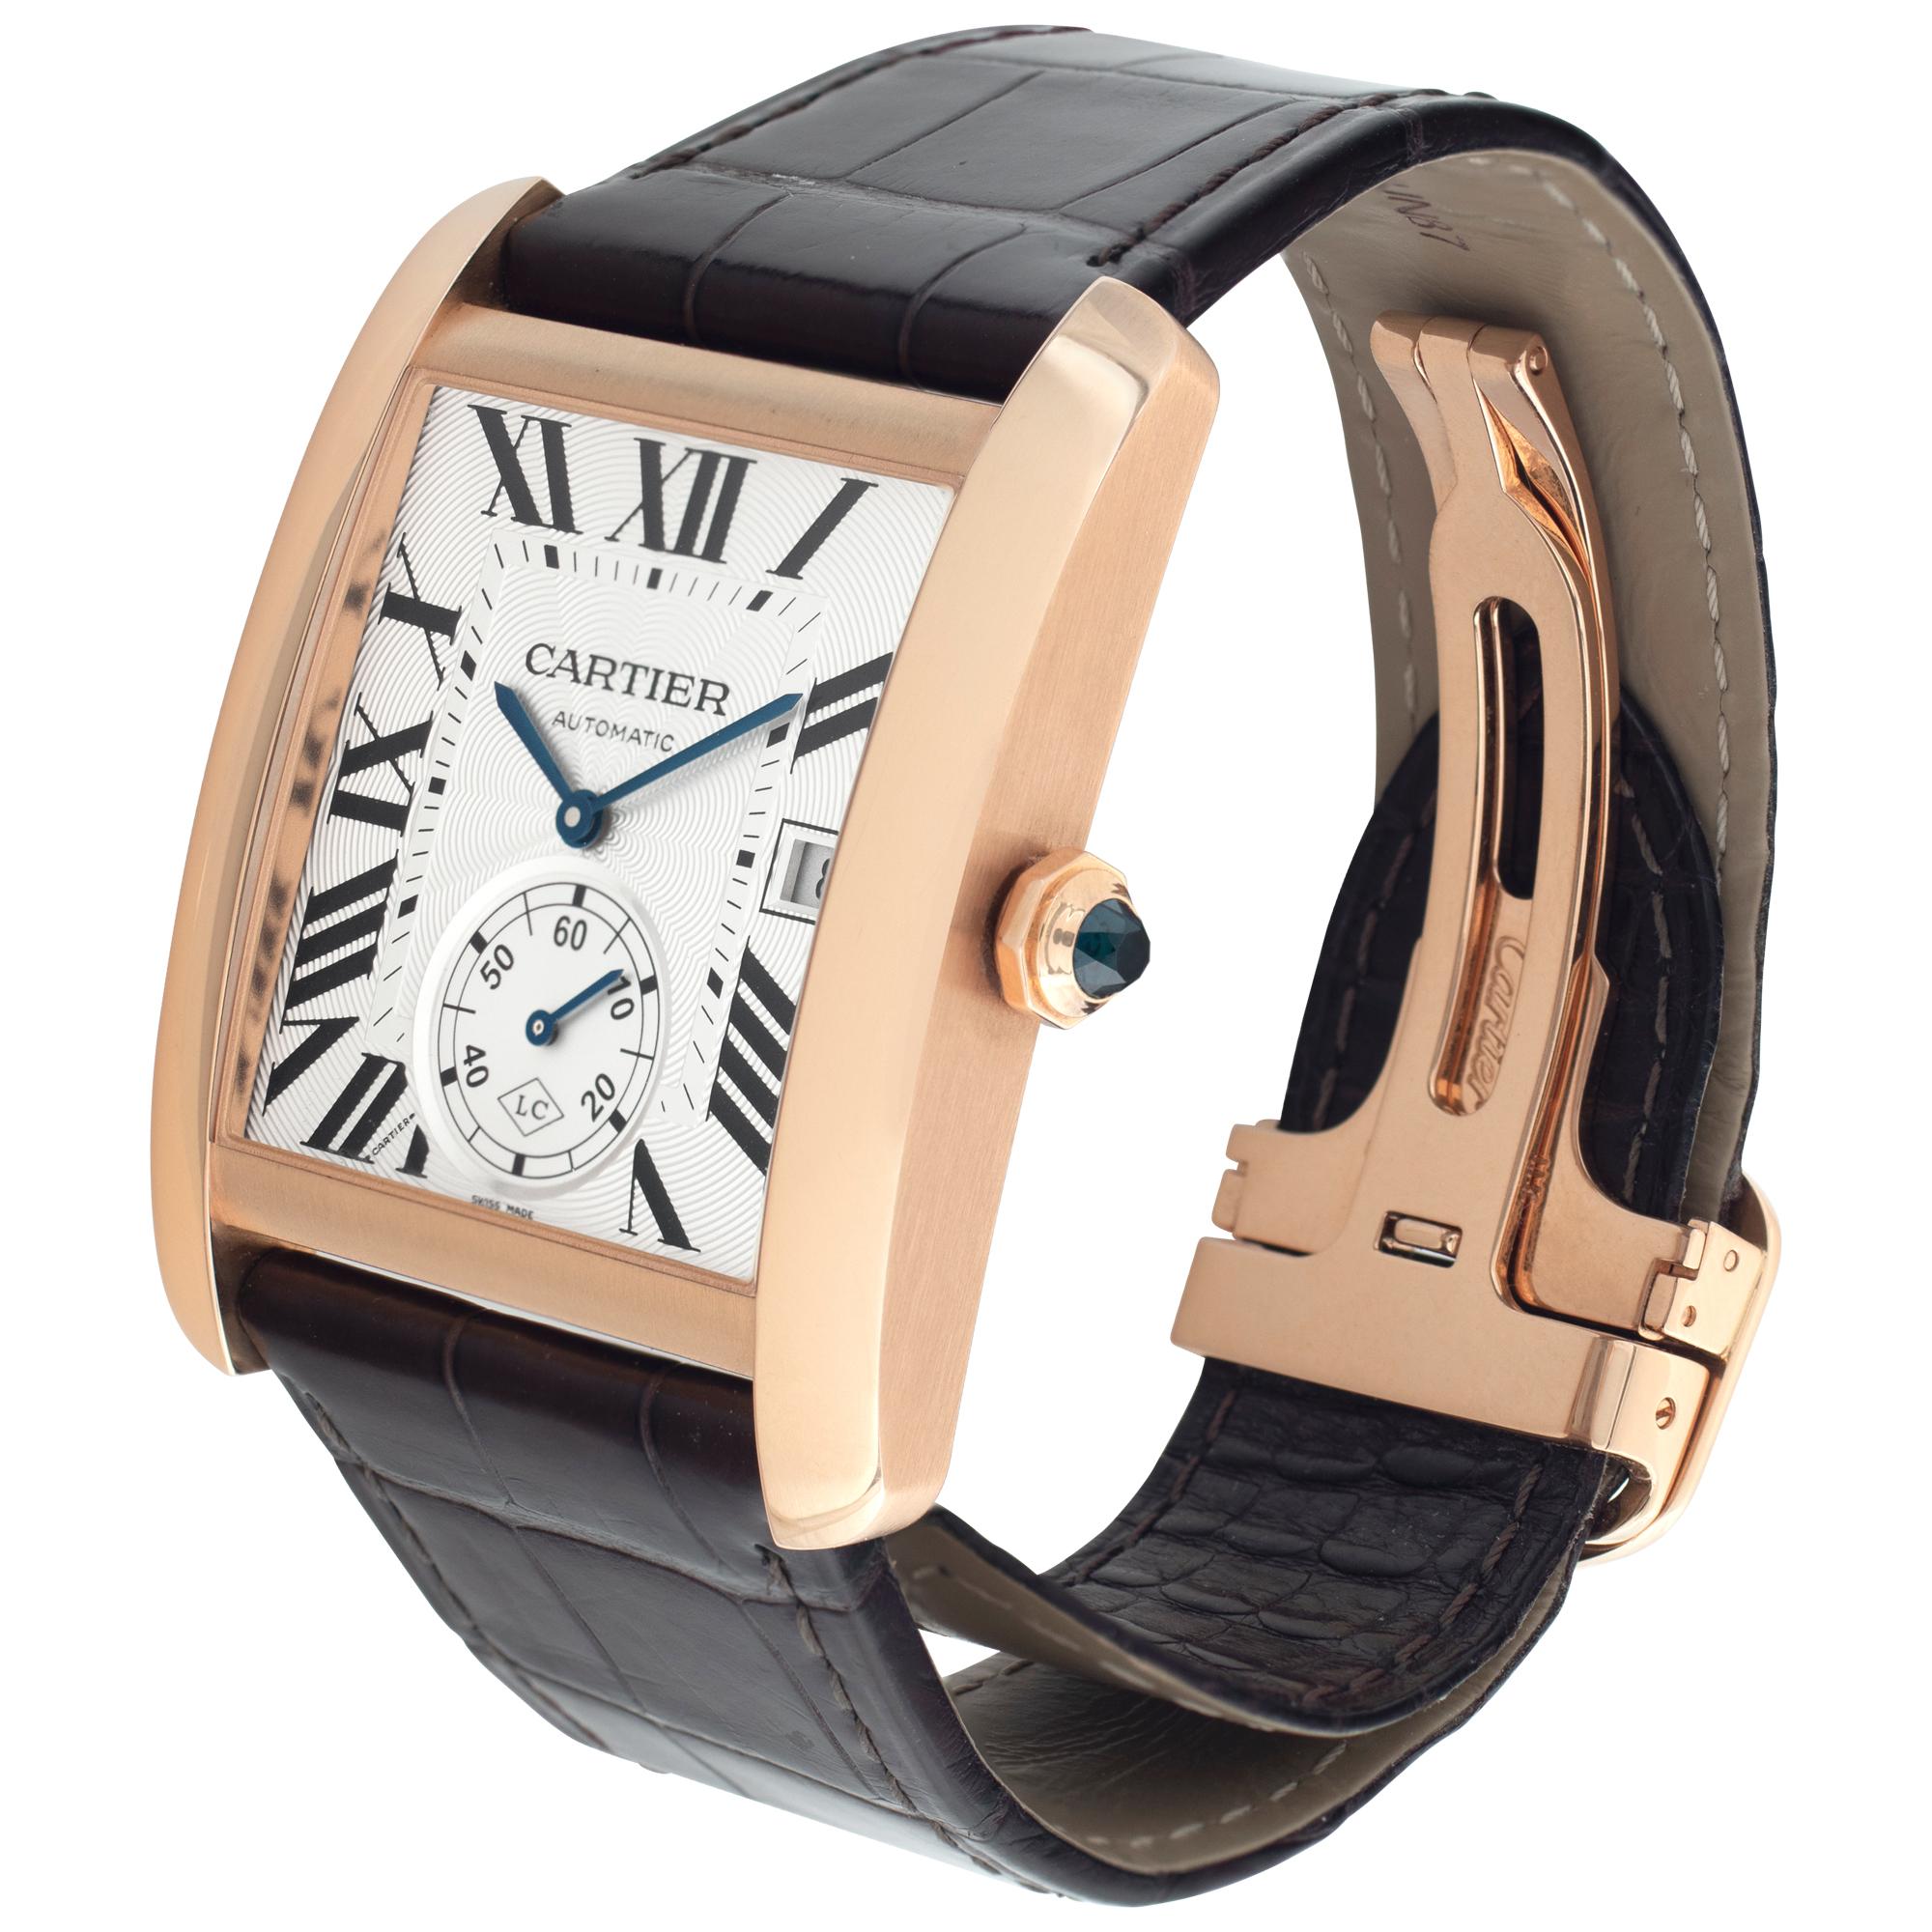 Cartier Tank MC in 18k rose gold on brown alligator strap with 18k rose gold deployant buckle. Auto w/ subseconds and date. 35 mm x 33 mm case size. With box. Ref w5330001. Fine Pre-owned Cartier Watch. Certified preowned Dress Cartier Tank MC